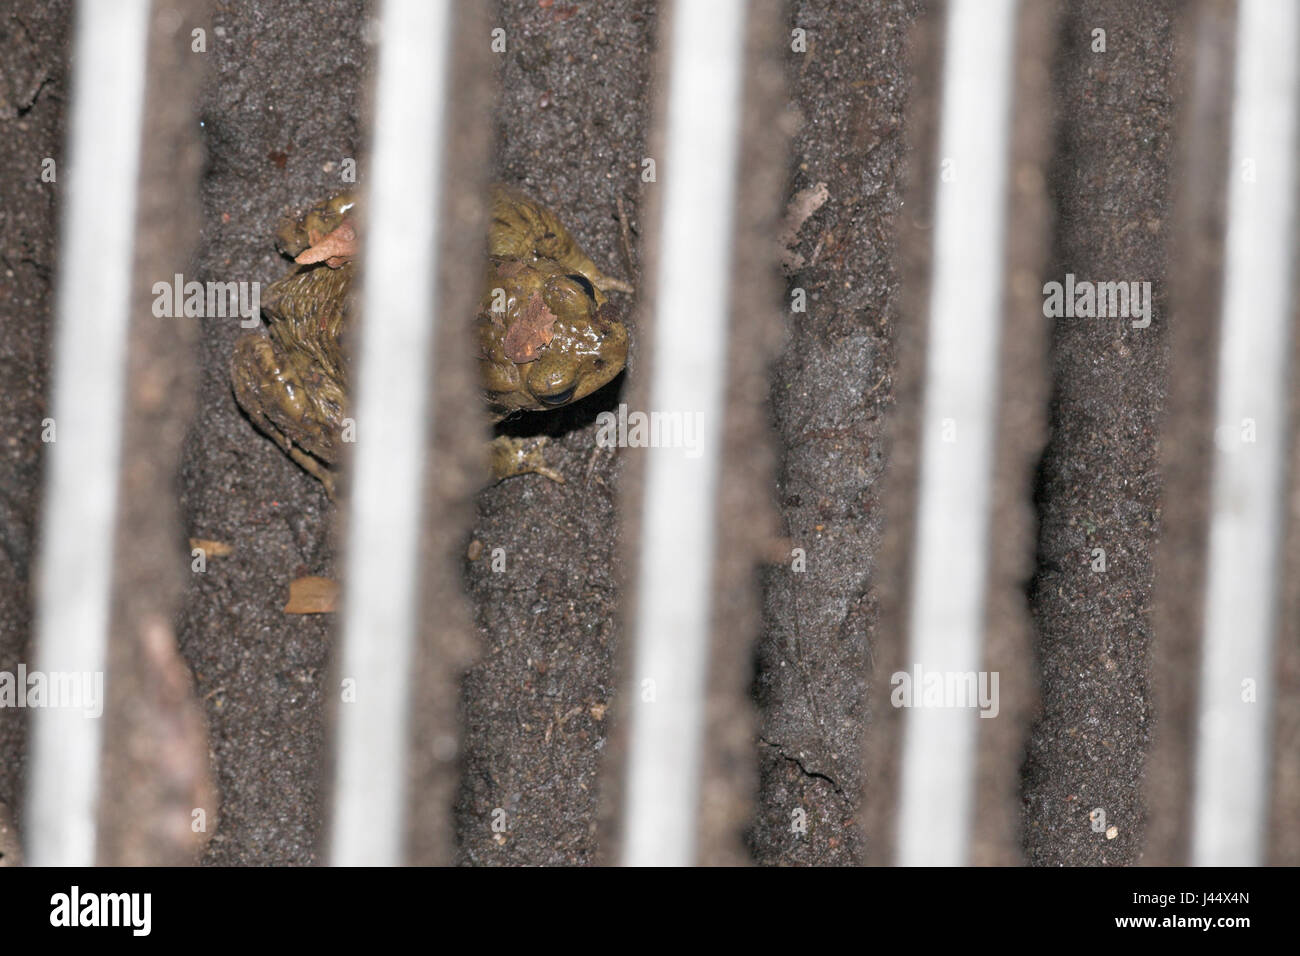 common toad in mitigation tunnel for amphibians Stock Photo